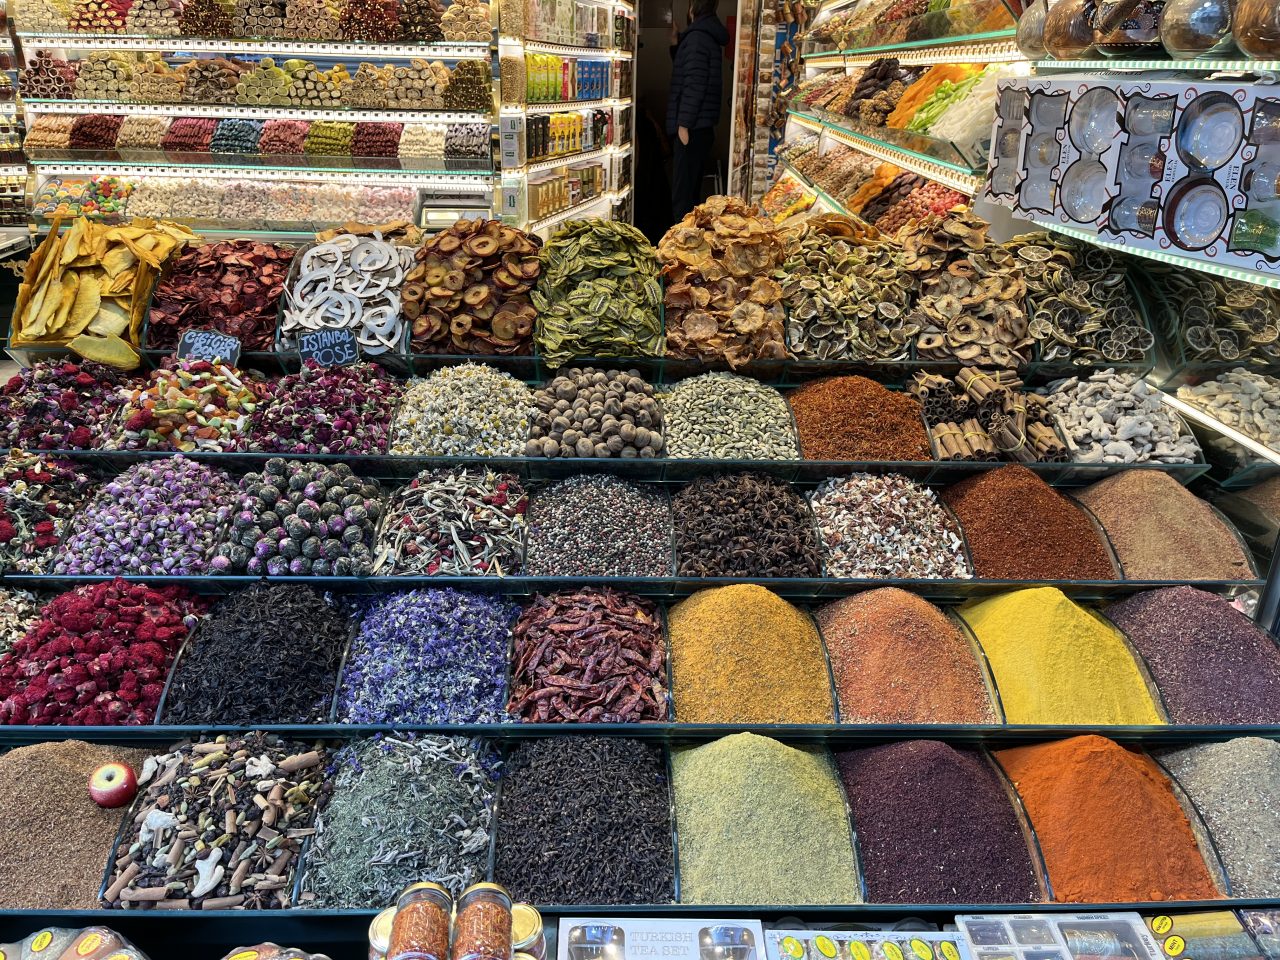 An array of spices (looks like it a market place).